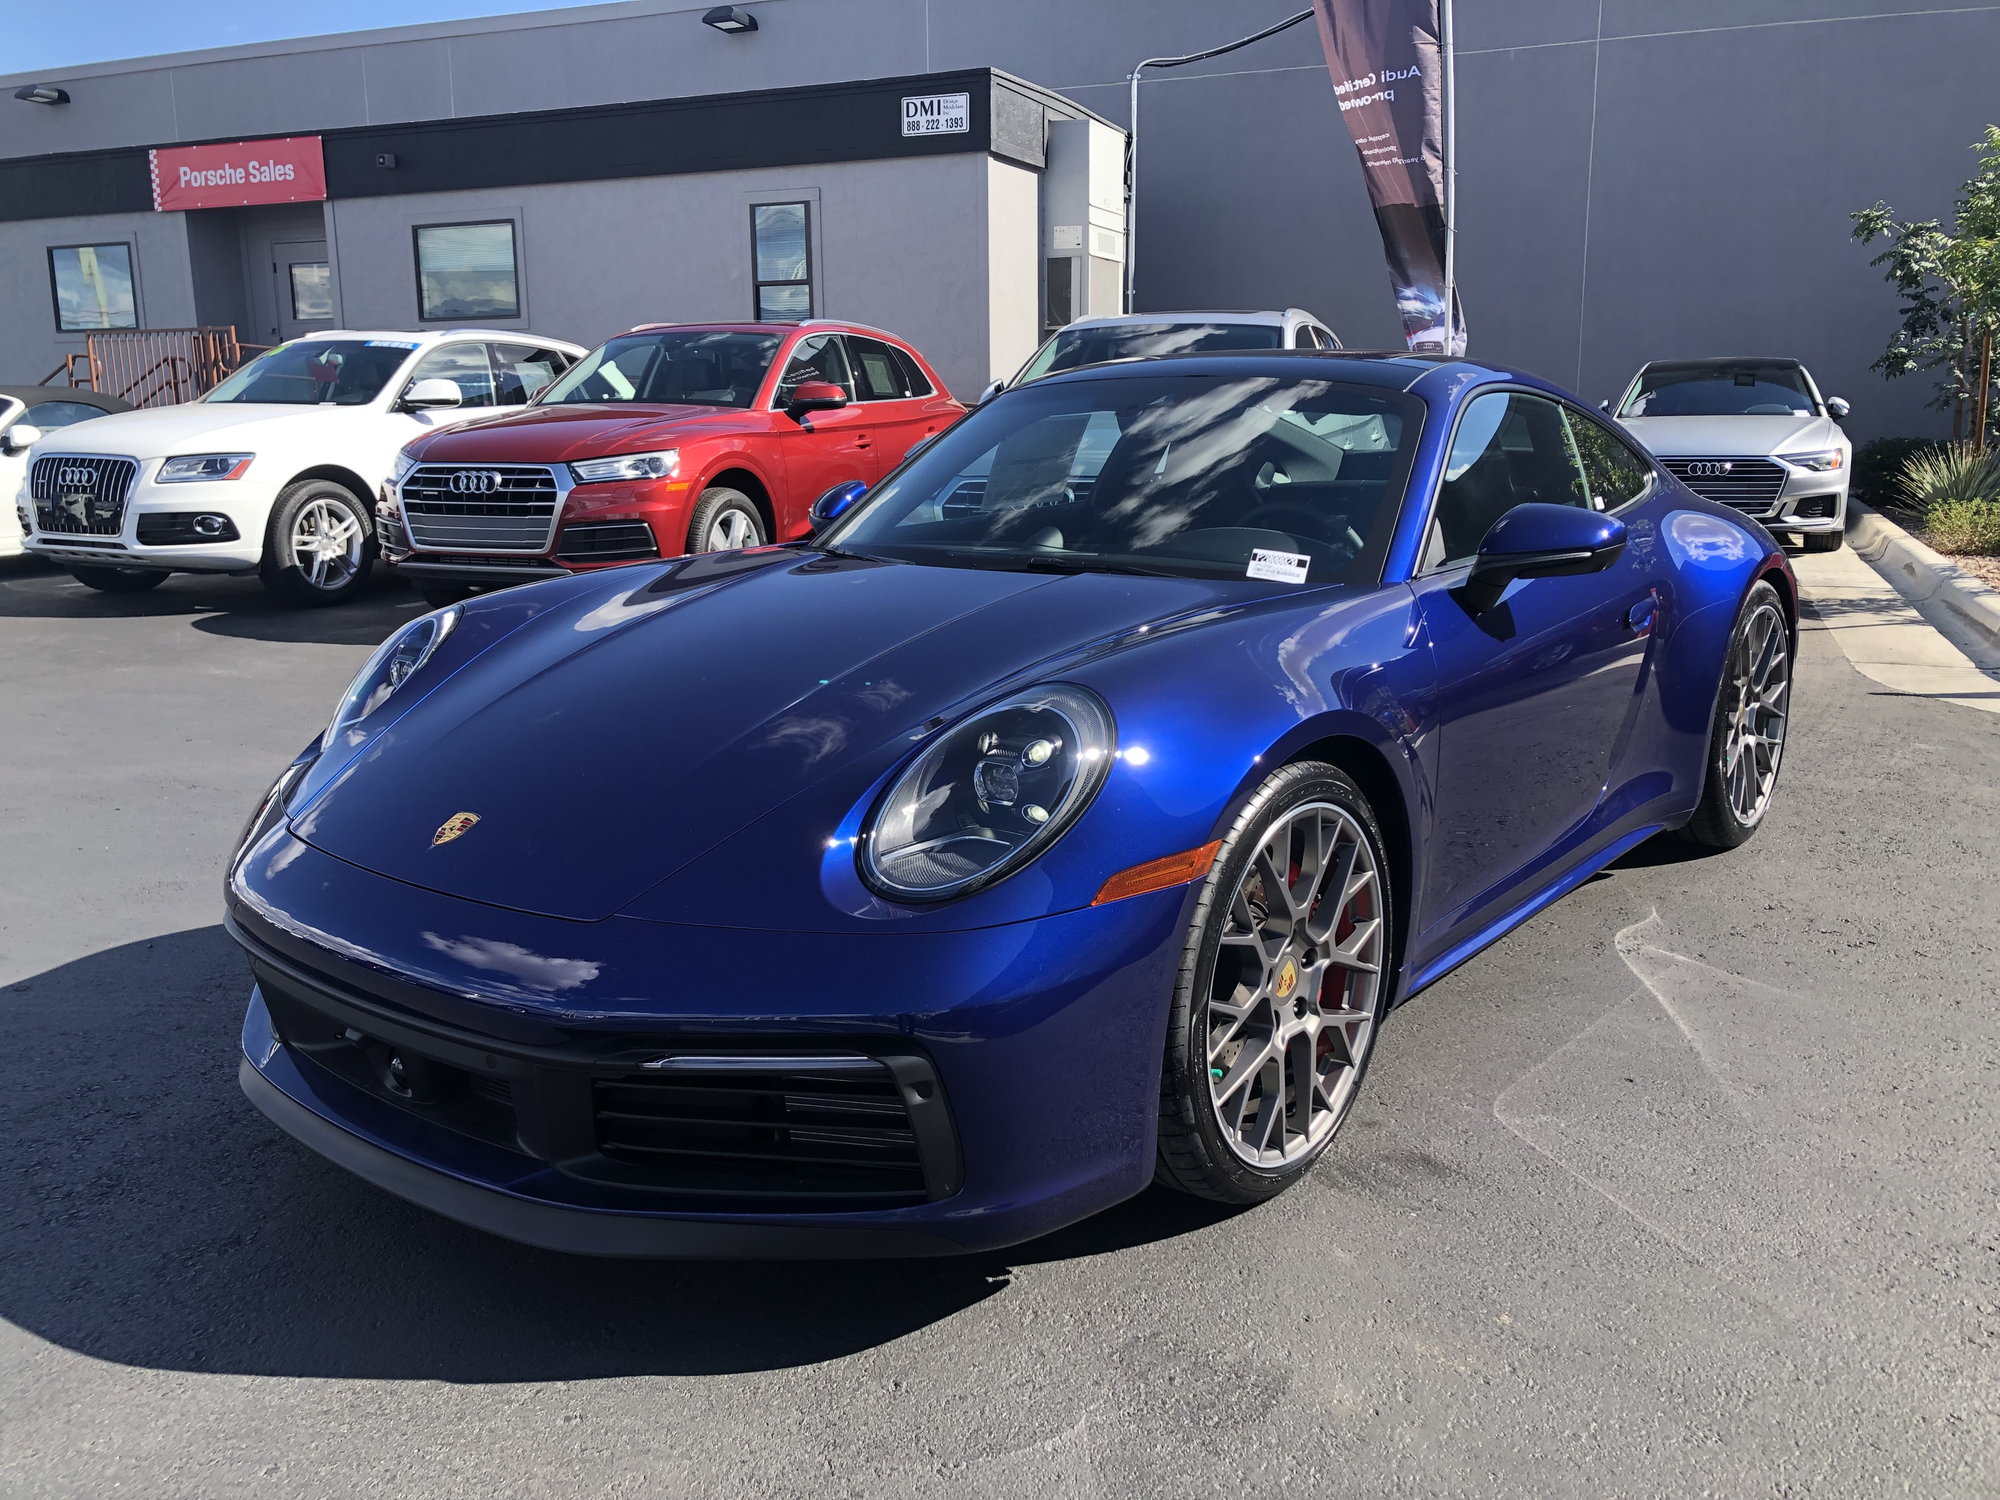 2019 Porsche GT3 - 2020 Gentian Blue 992 911 4S Available For Immediate Delivery! - New - VIN WP0AB2A98LS226321 - 13 Miles - 6 cyl - AWD - Automatic - Coupe - Blue - Tucson, AZ 85711, United States